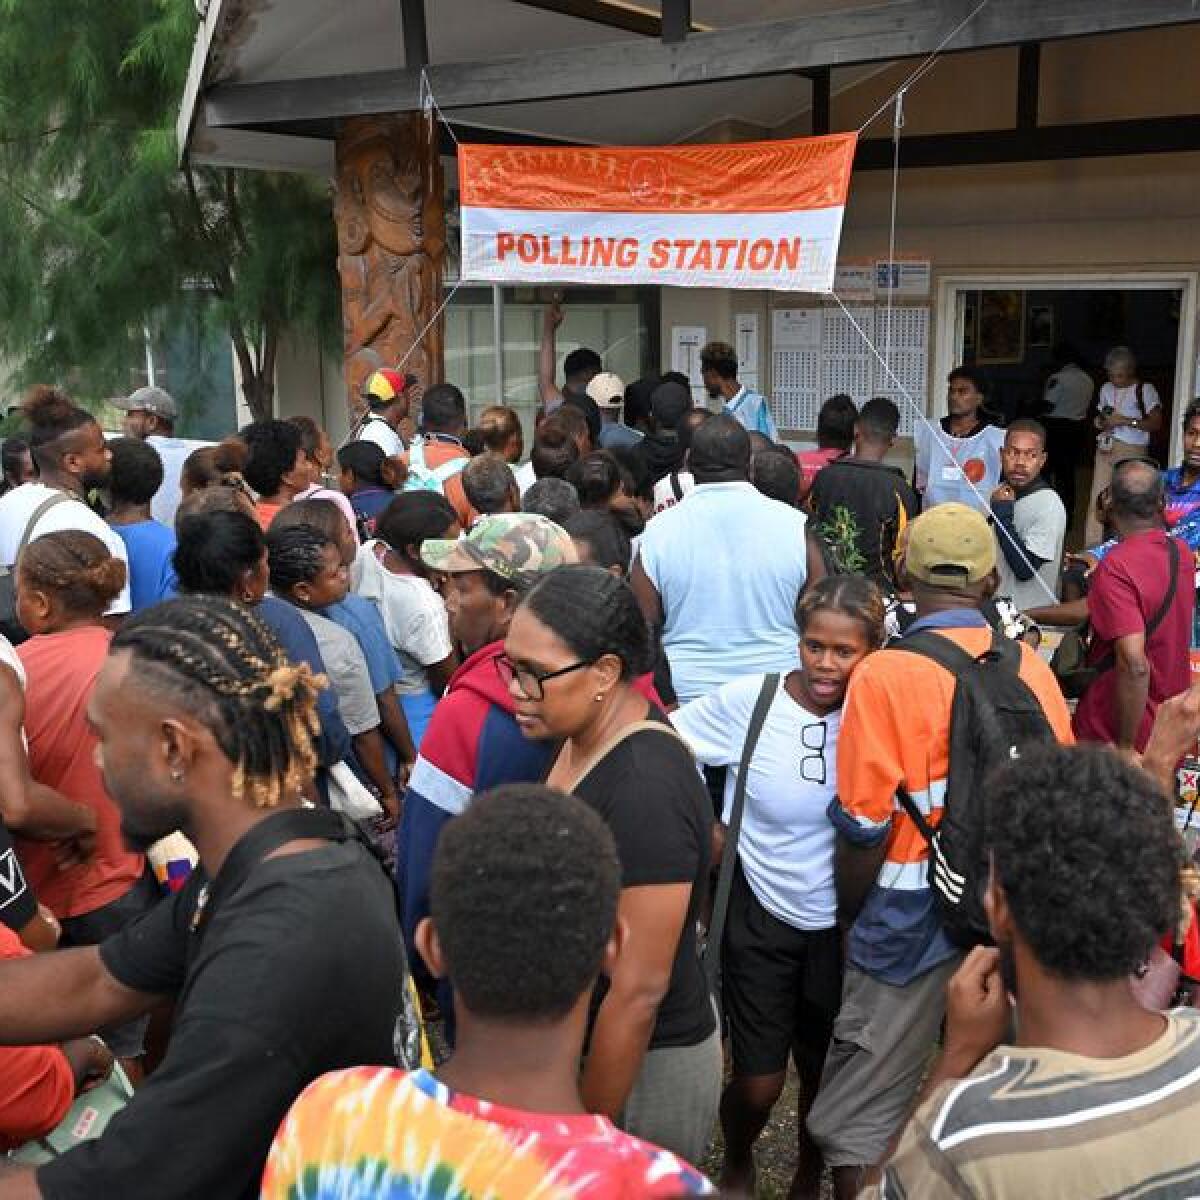 Voters at a polling station during the Solomon Islands elections